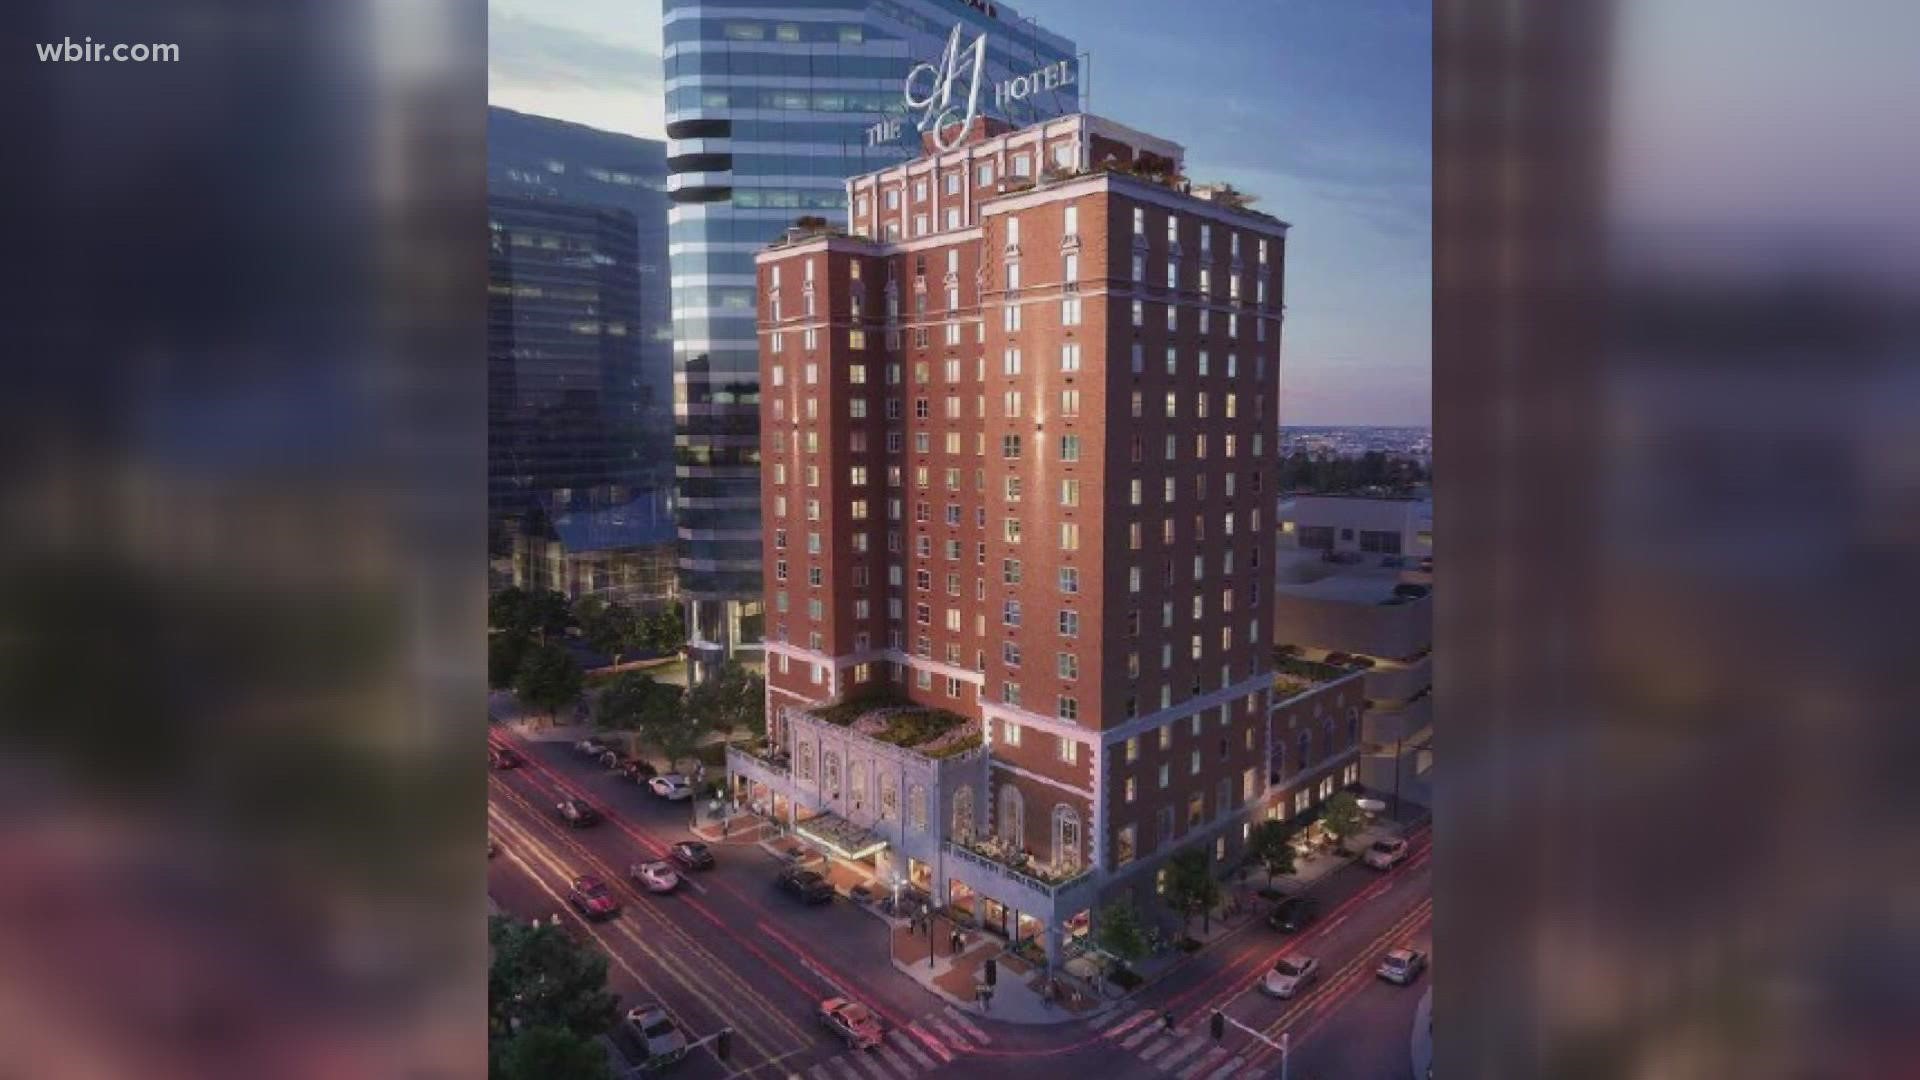 After years of delays, the Andrew Johnson Building's future appears to be moving forward with a return to its hotel and music roots.